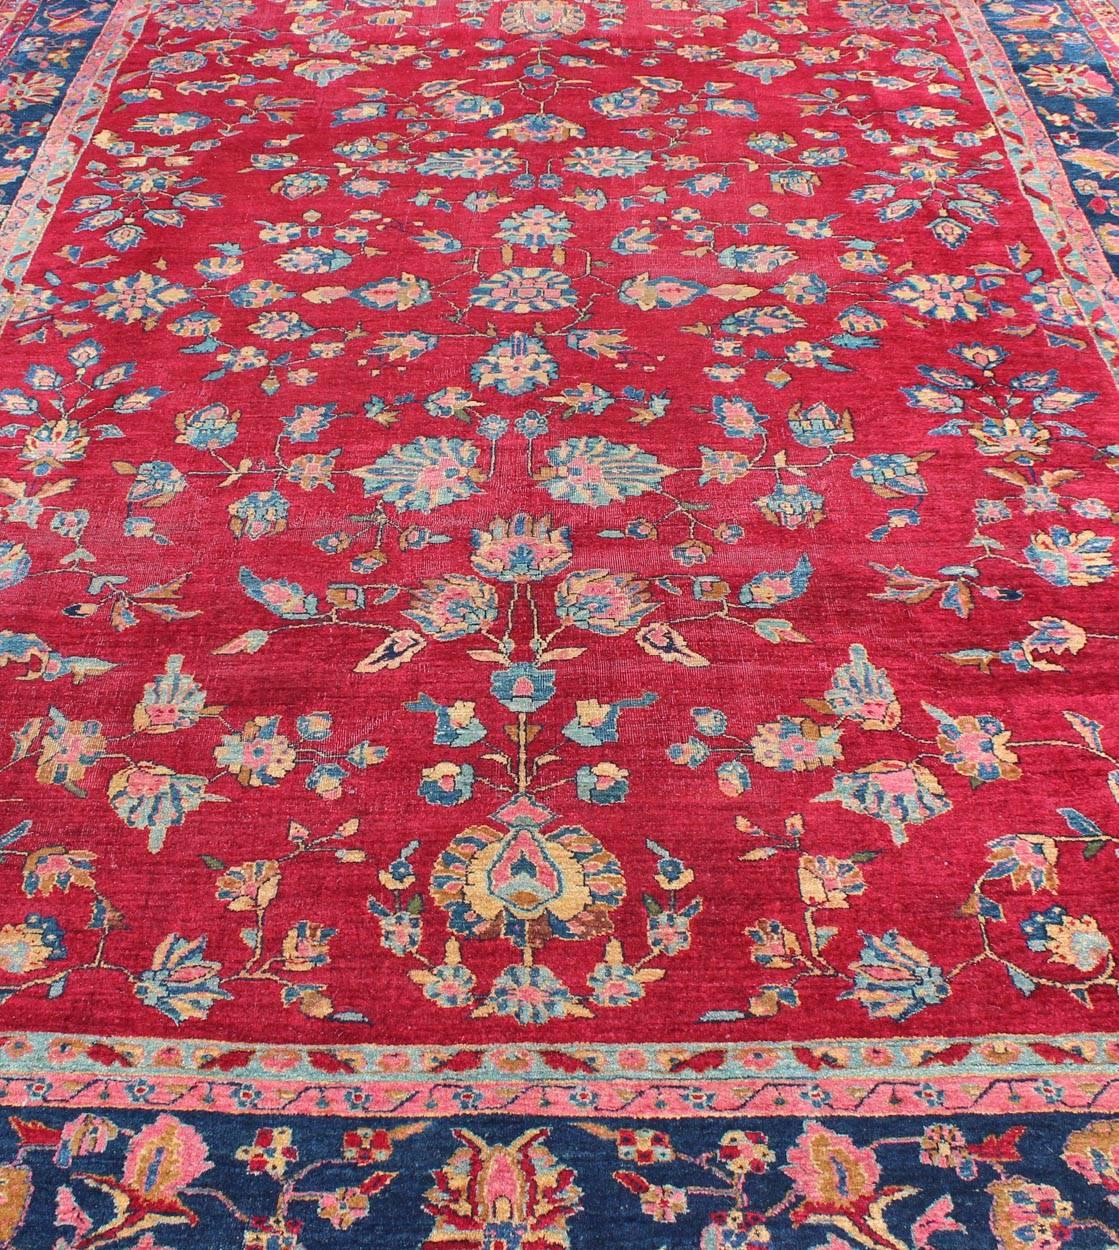 All-Over Floral Design Antique Indian Amritsar Rug in Red and Blue Tones For Sale 2